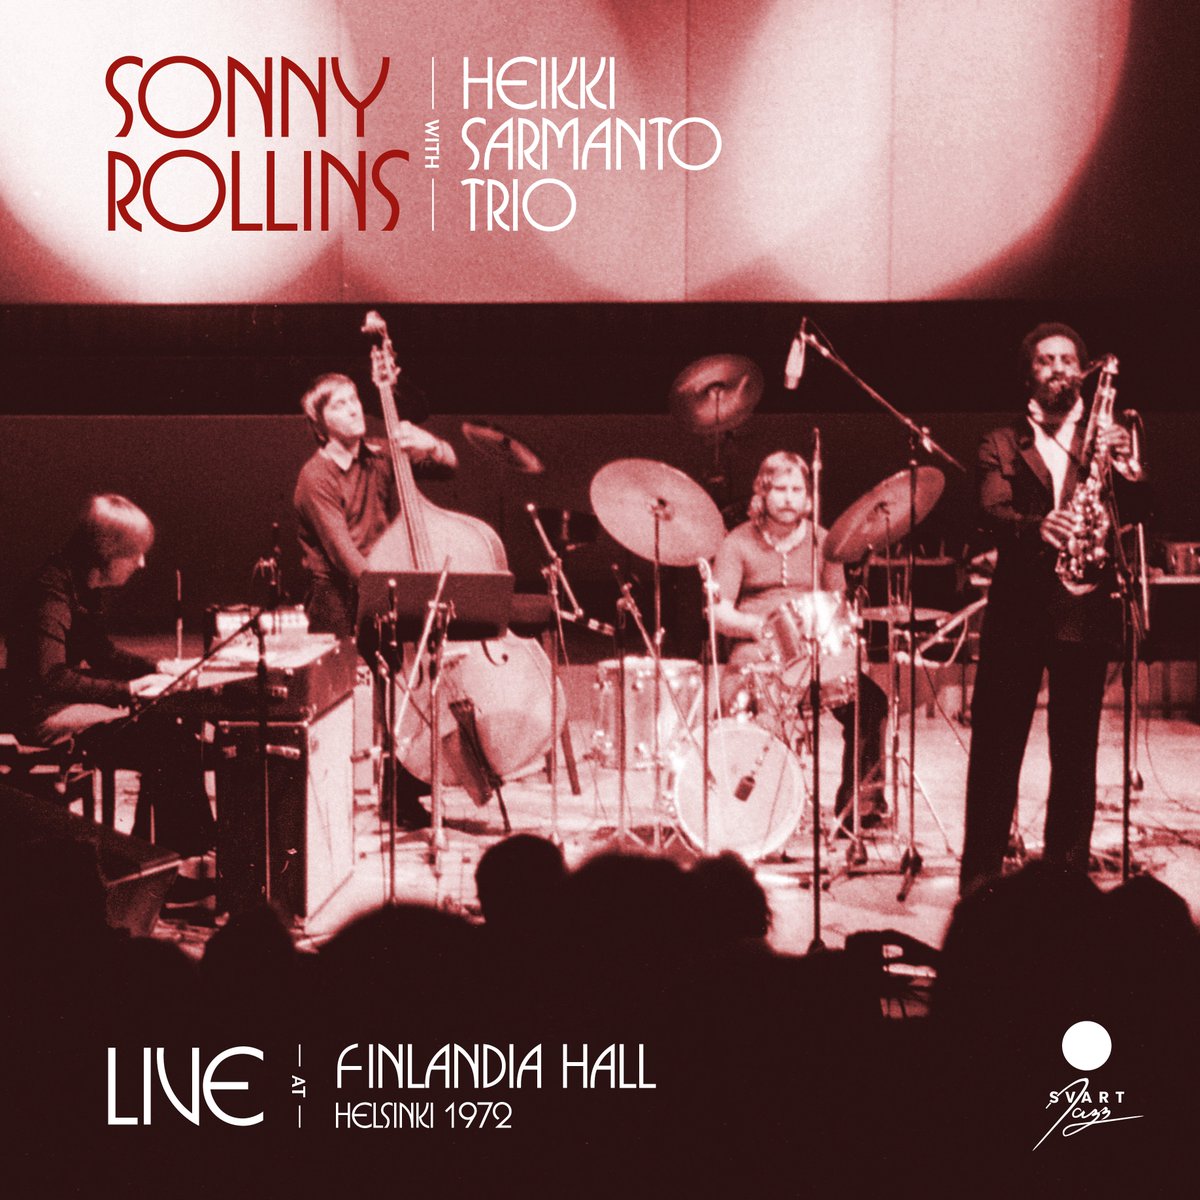 A previously unreleased live recording from 1972 of Sonny Rollins in Helsinki, with three Finns backing him? YES PLEASE. Out on Svart Records in June. https://t.co/2KiAMuAwS8